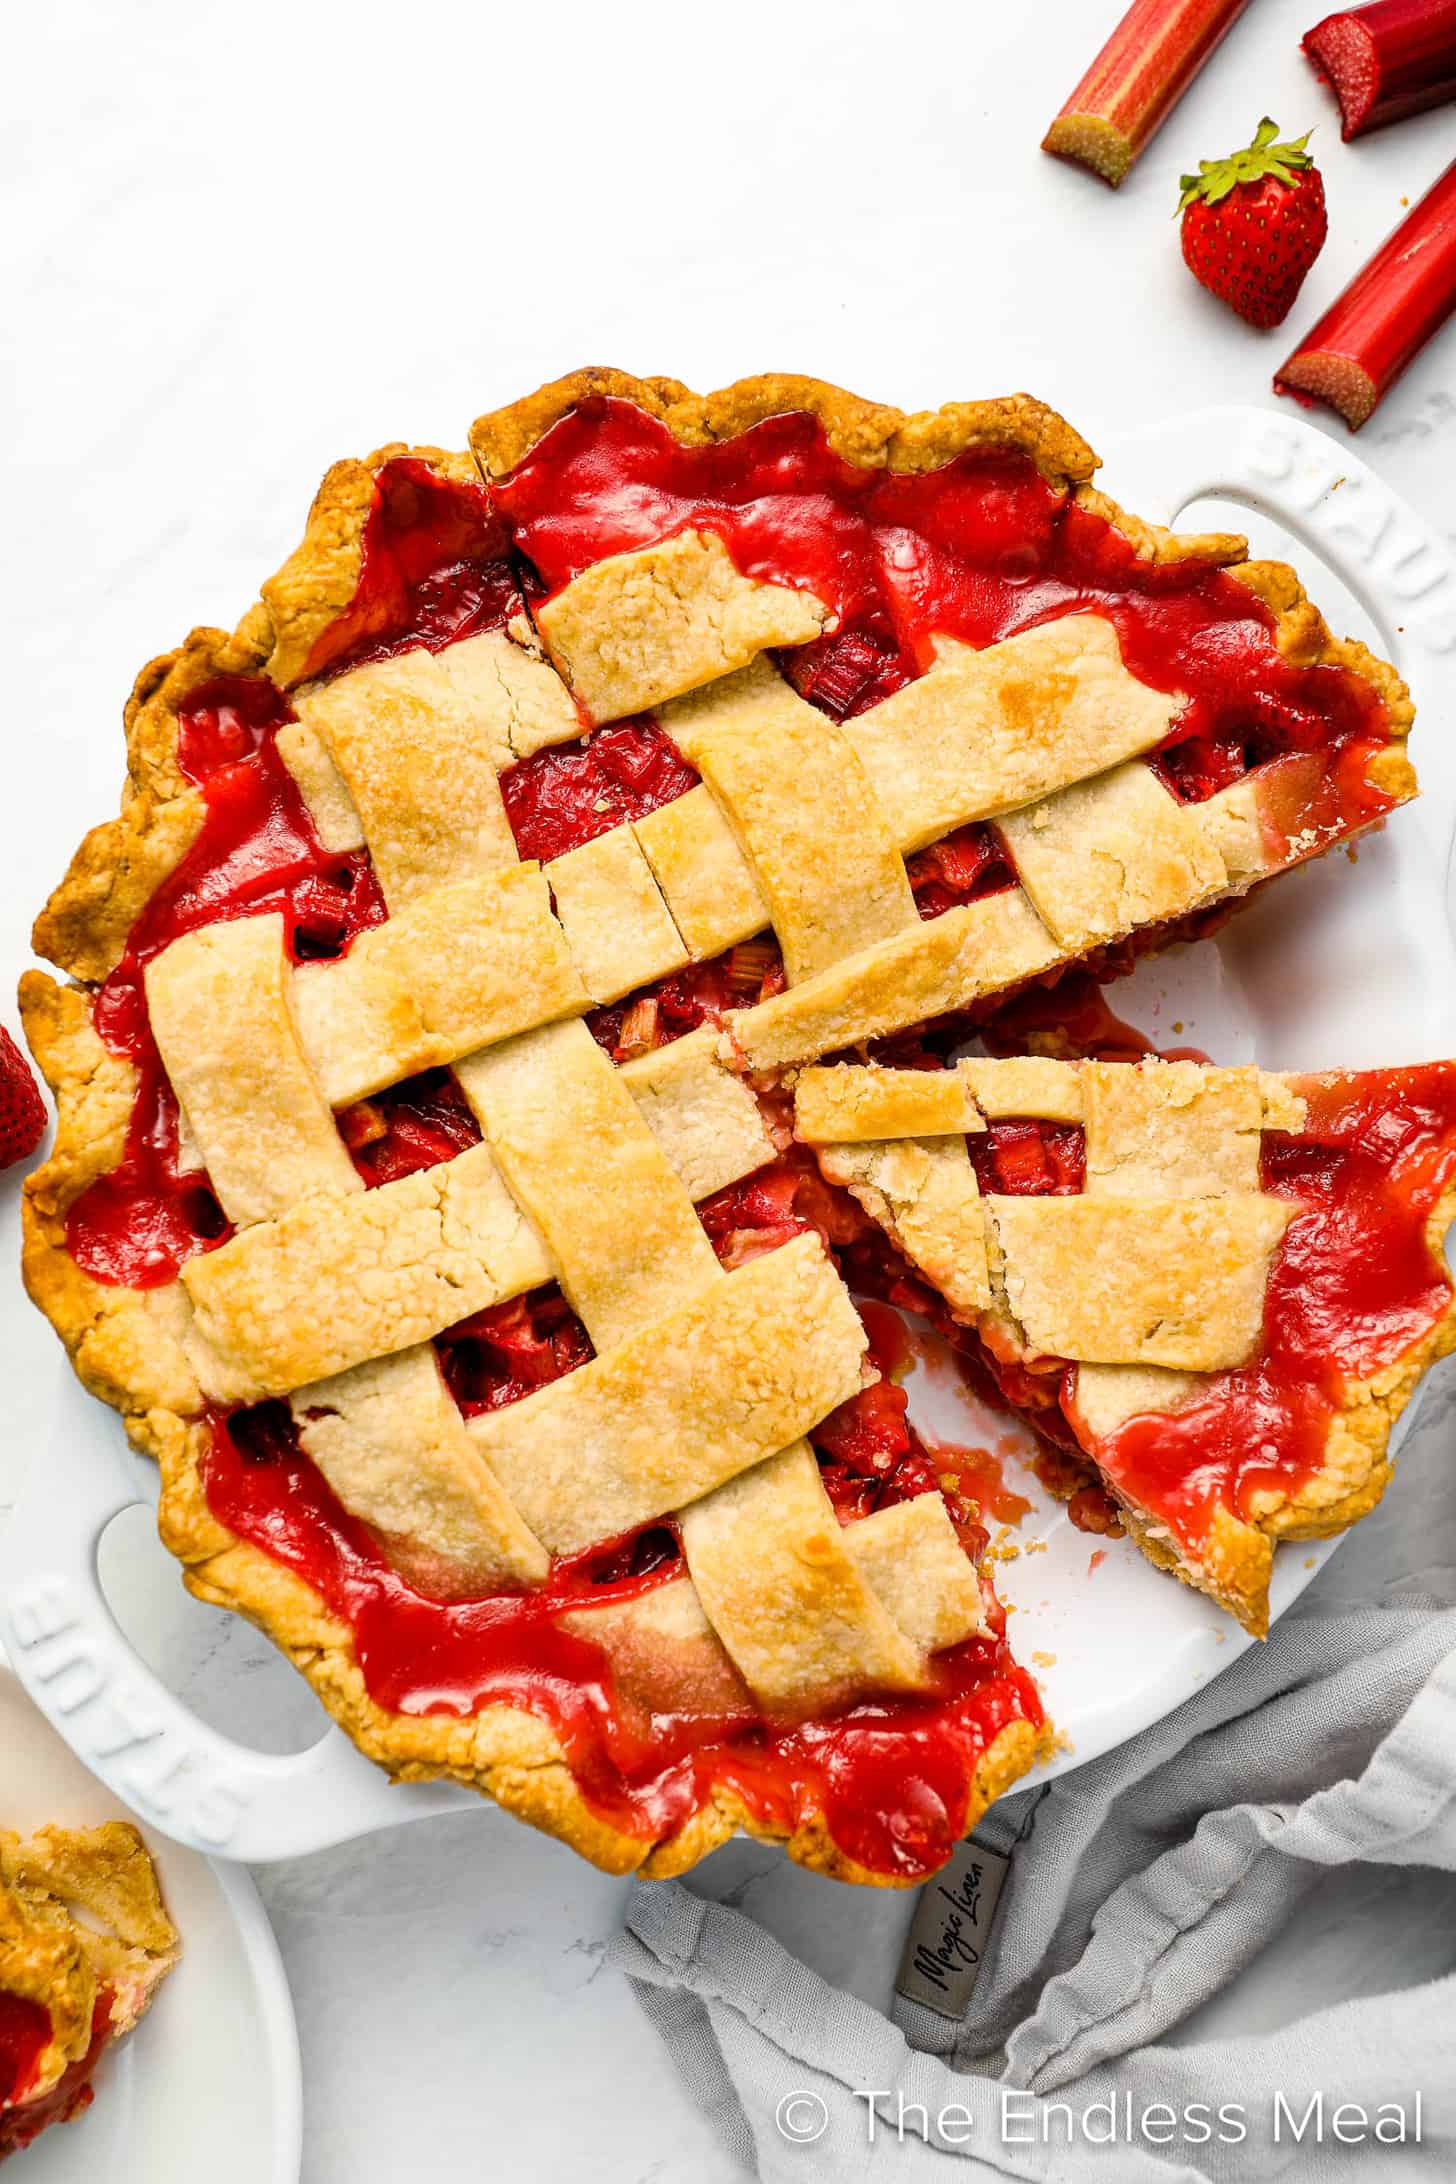 This Strawberry Rhubarb Pie recipe hot out of the oven.